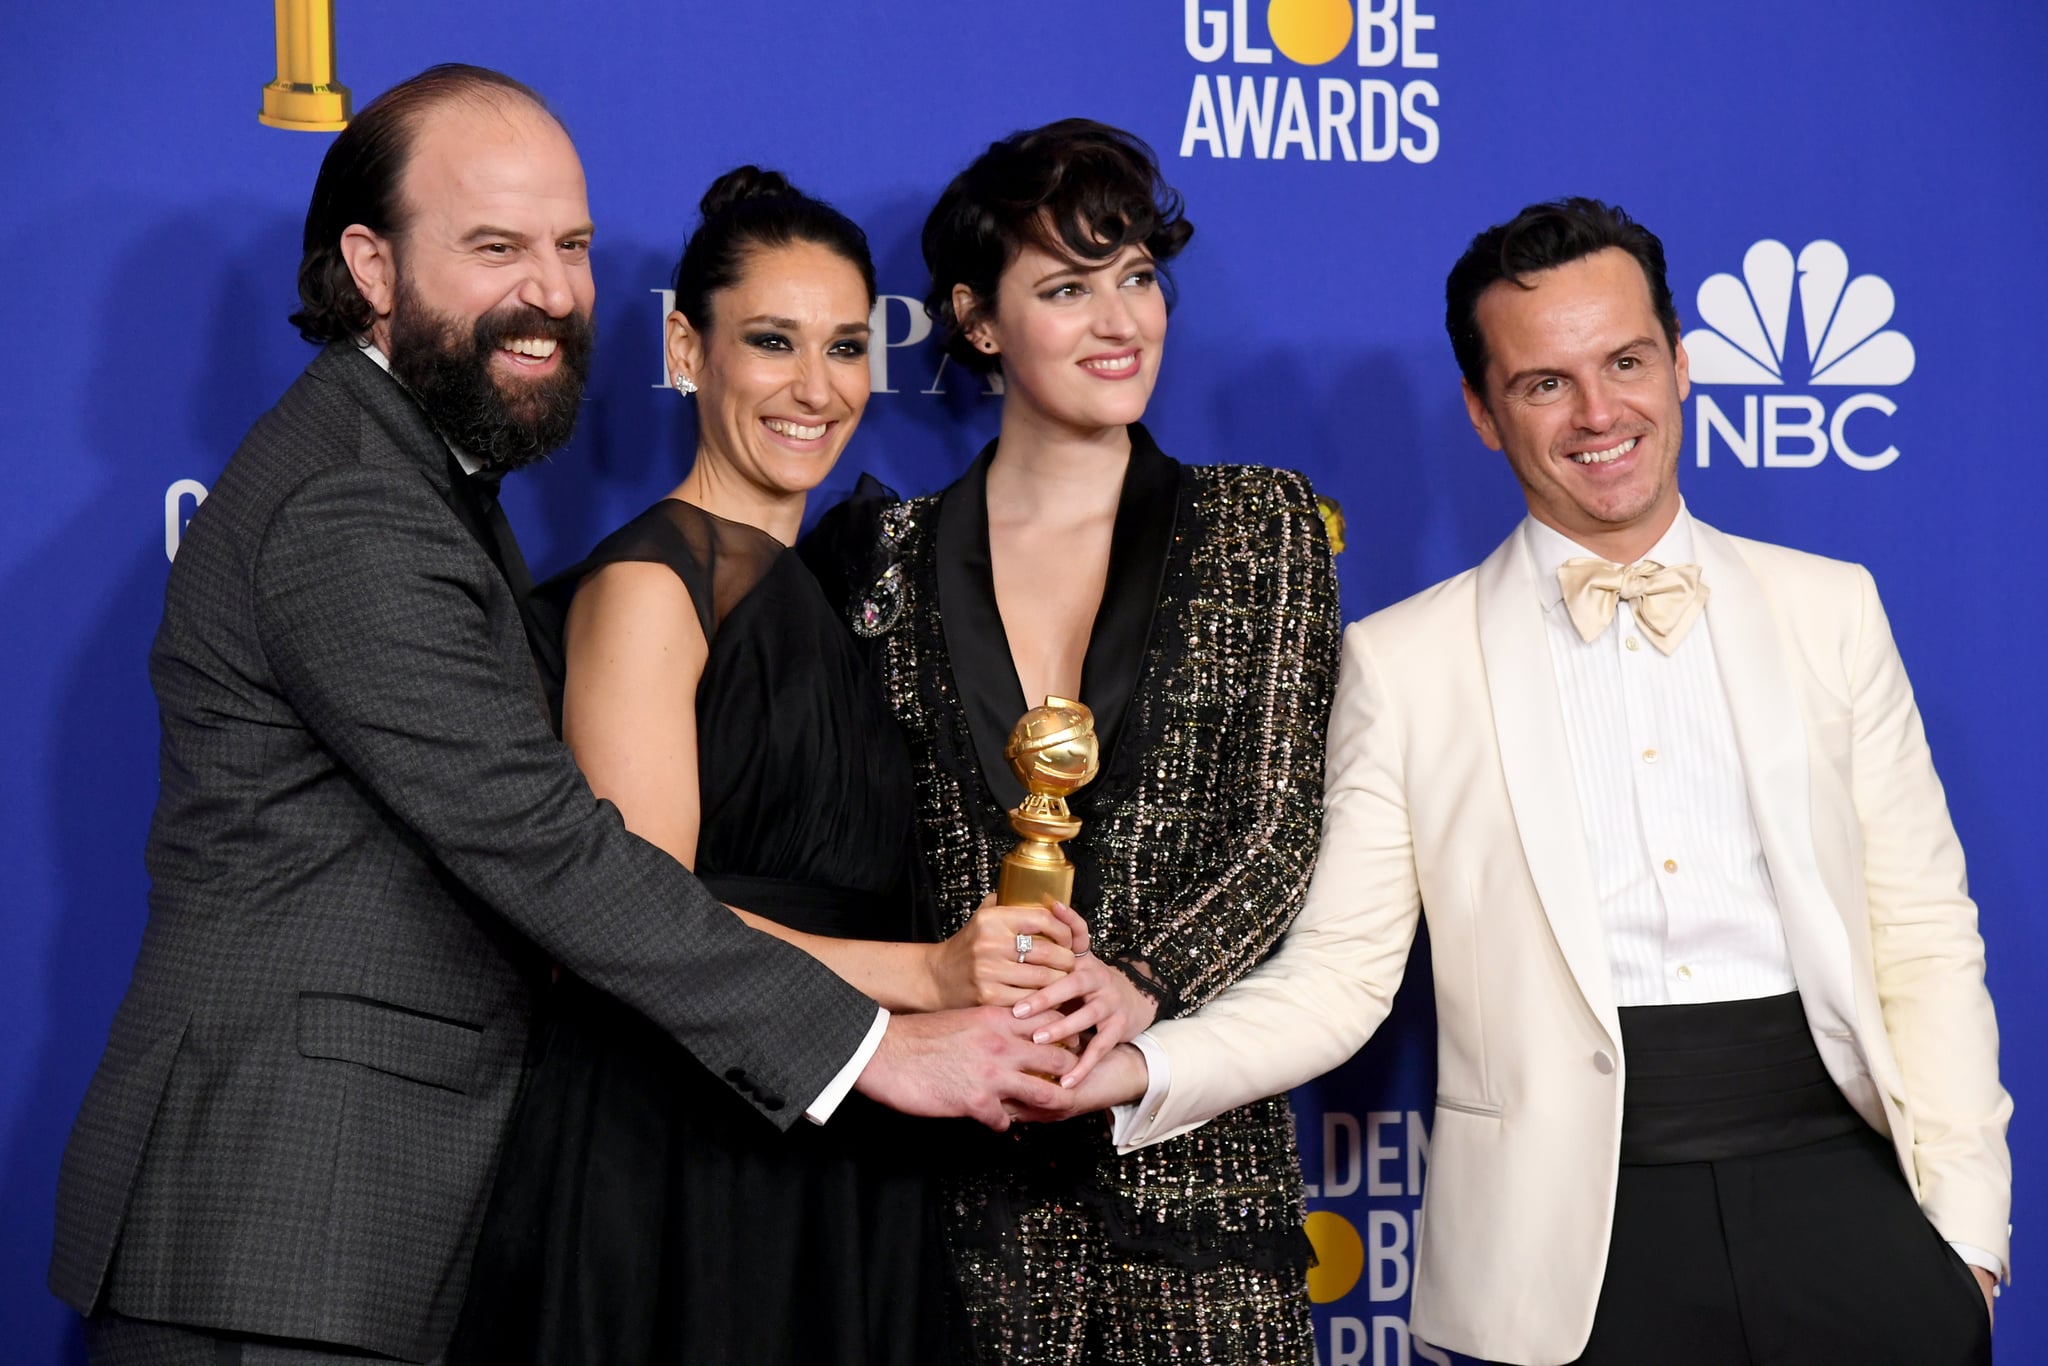 BEVERLY HILLS, CALIFORNIA - JANUARY 05:  (L-R) Brett Gelman, Sian Clifford, Phoebe Waller-Bridge and Andrew Scott, winners of Best Television Series - Musical or Comedy poses in the press room during the 77th Annual Golden Globe Awards at The Beverly Hilton Hotel on January 05, 2020 in Beverly Hills, California. (Photo by Kevin Winter/Getty Images)